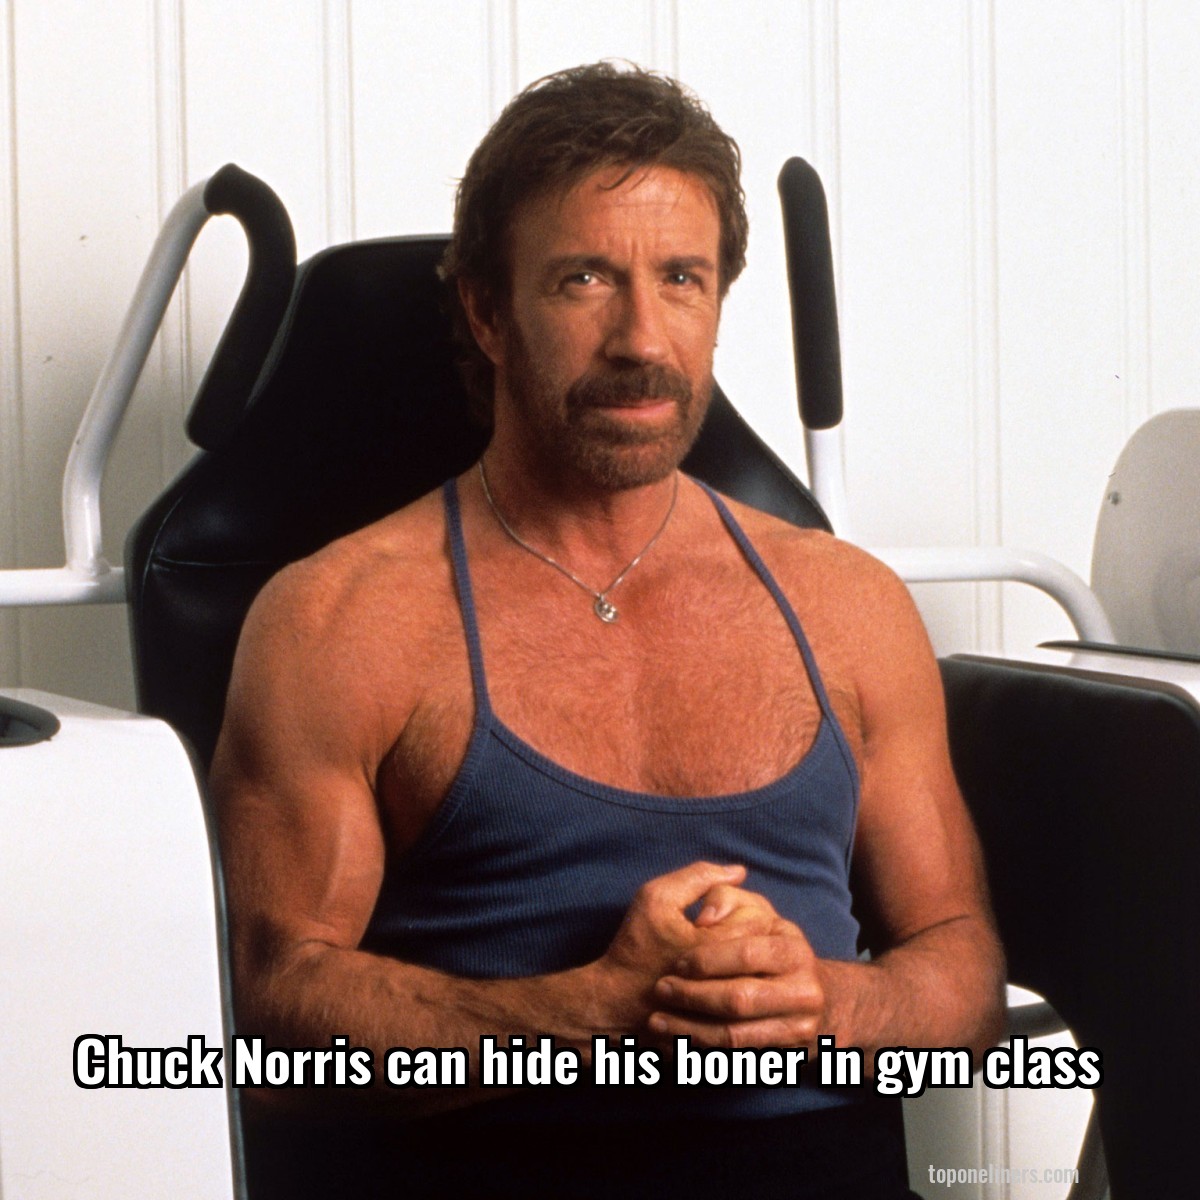 Chuck Norris can hide his boner in gym class